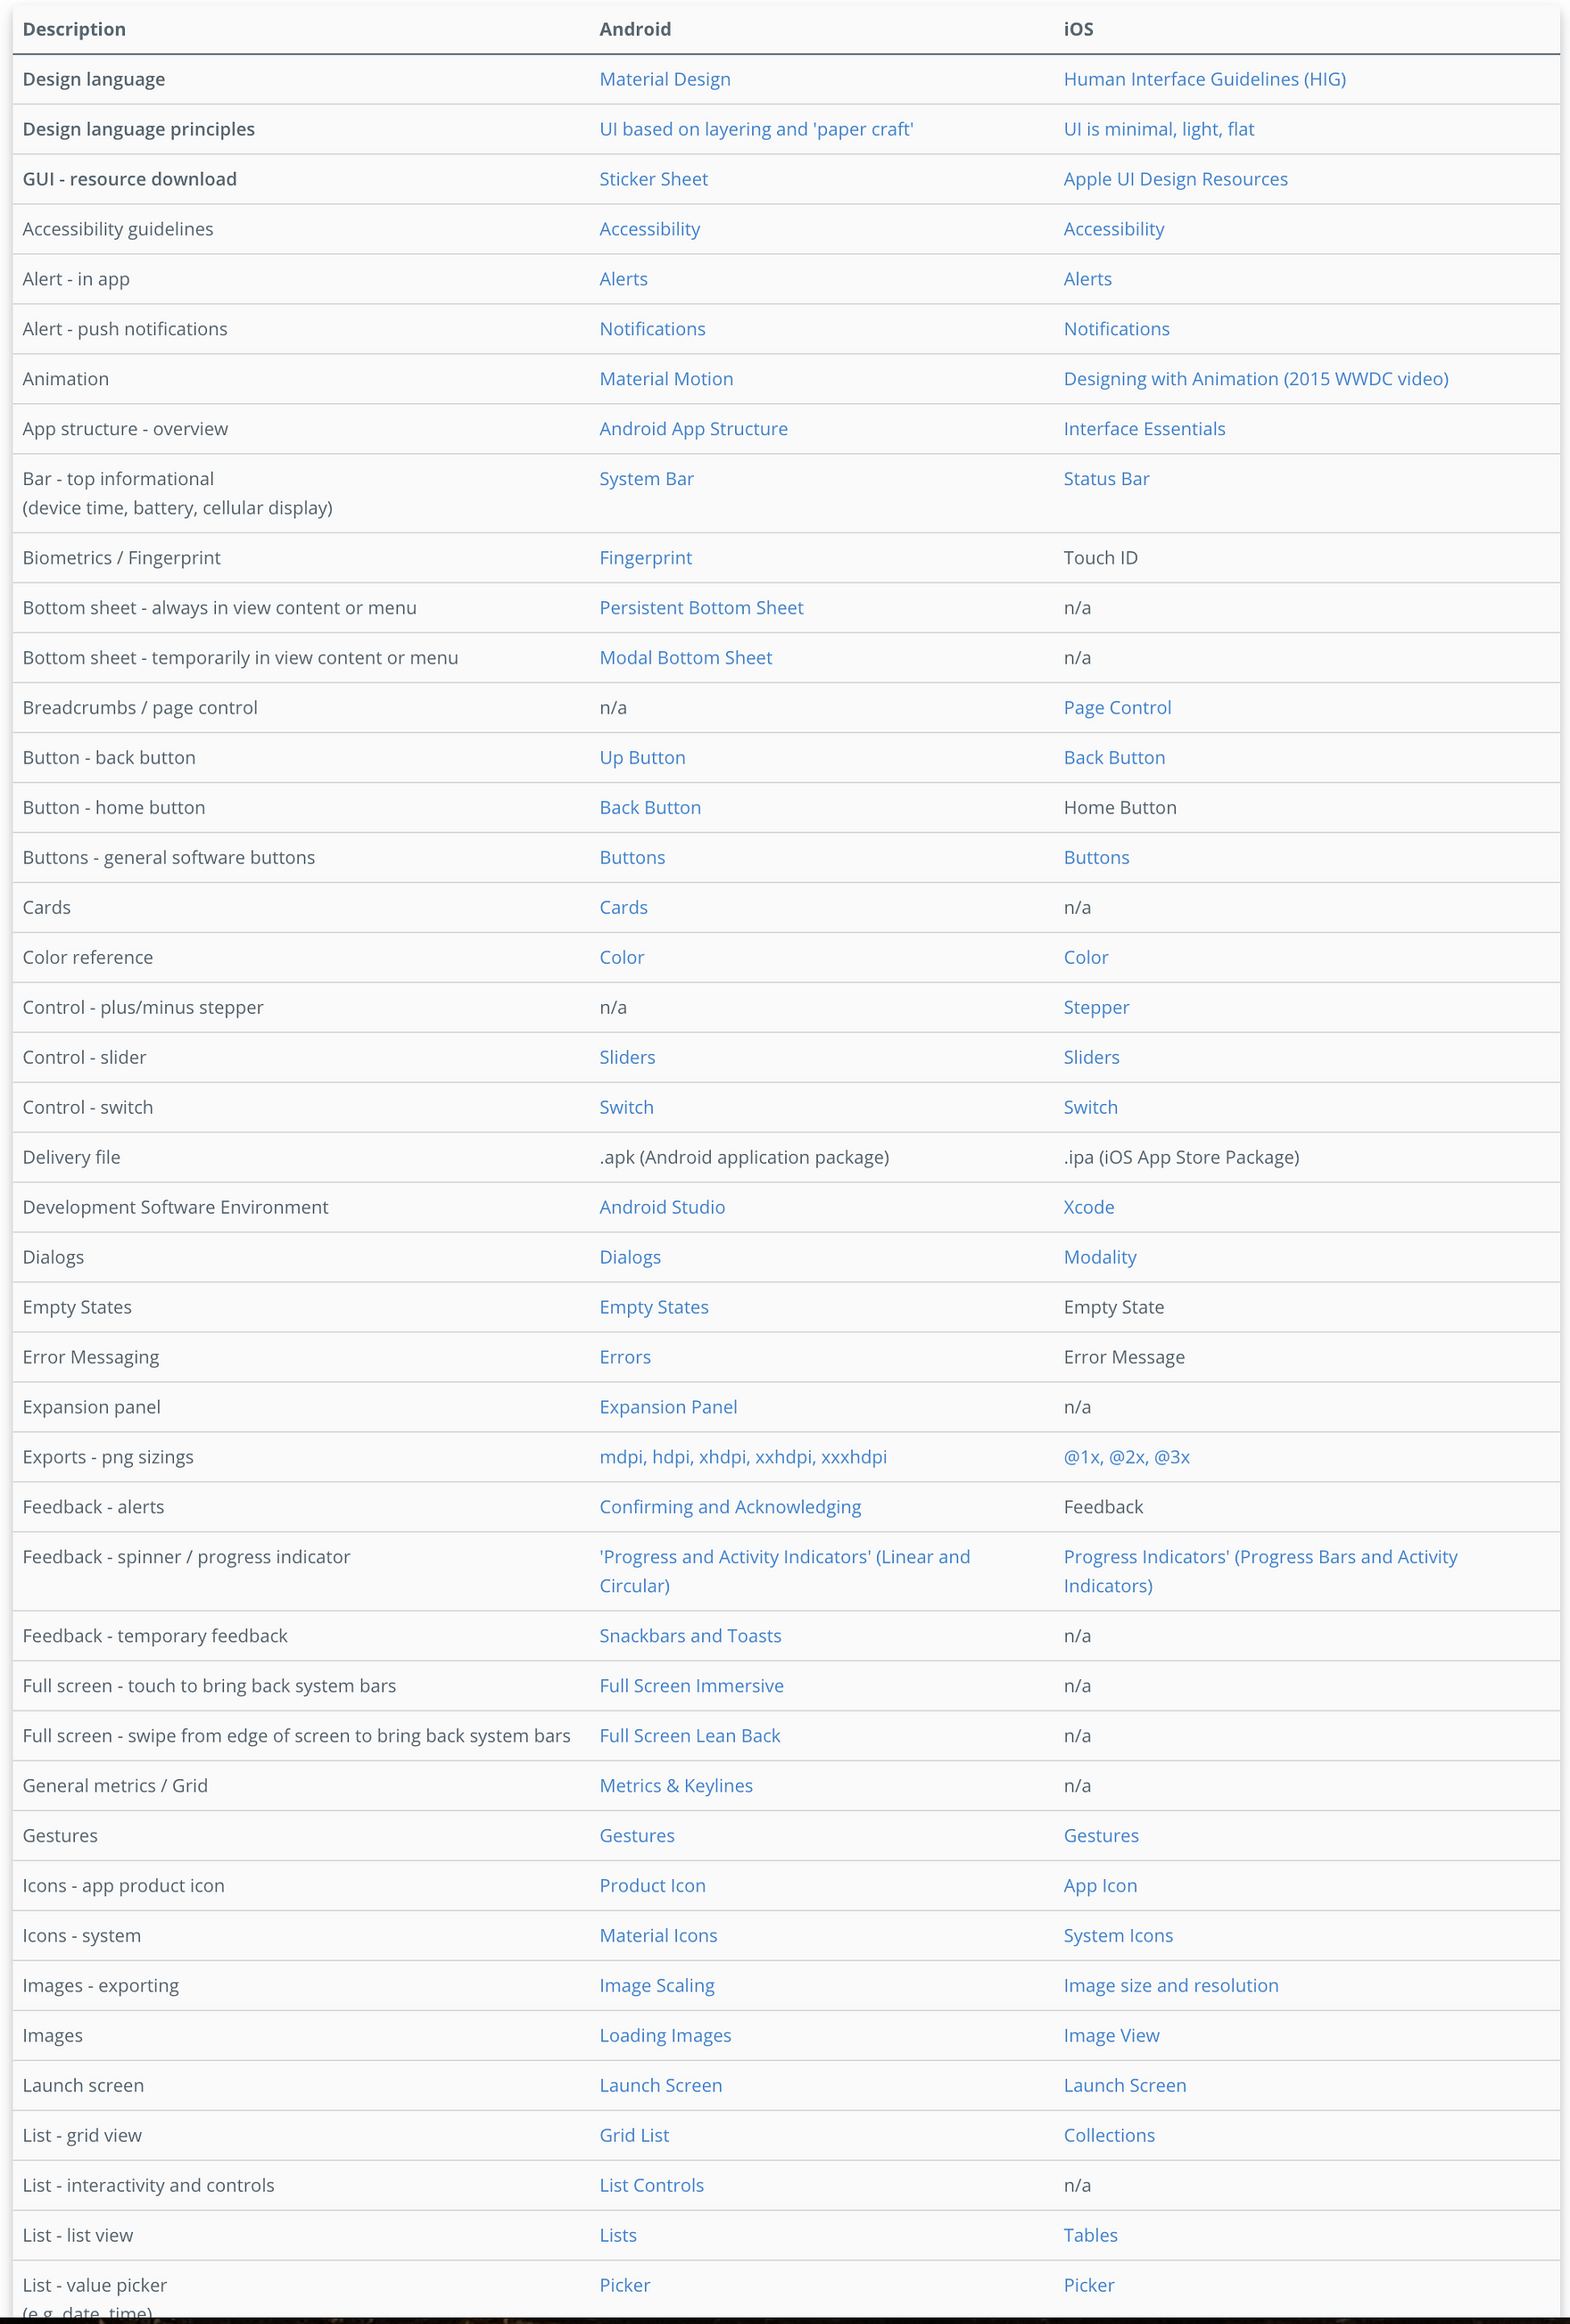 iOS vs Android Native Features terminology